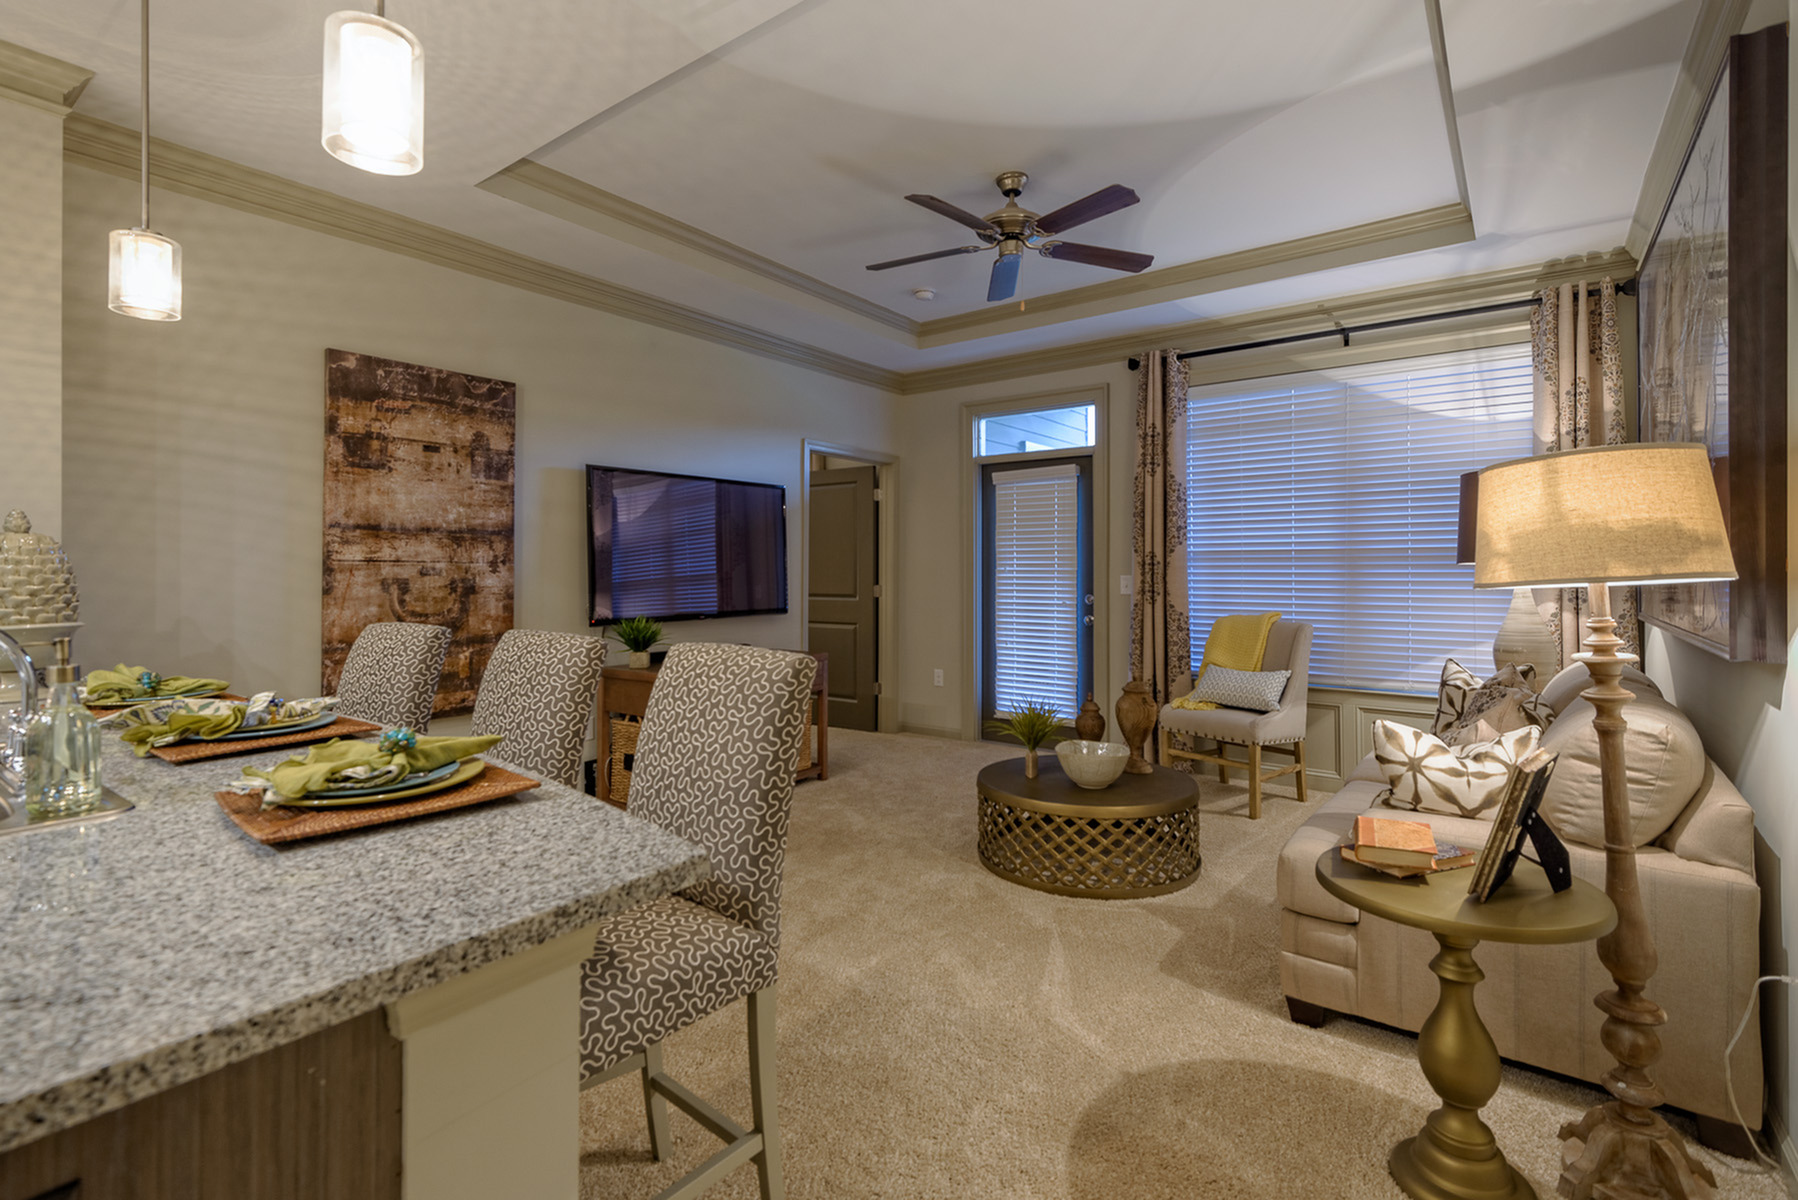 View of Living Room, Showing Bar Stools, Ceiling Fan, and Window View at Heights at Meridian Apartments